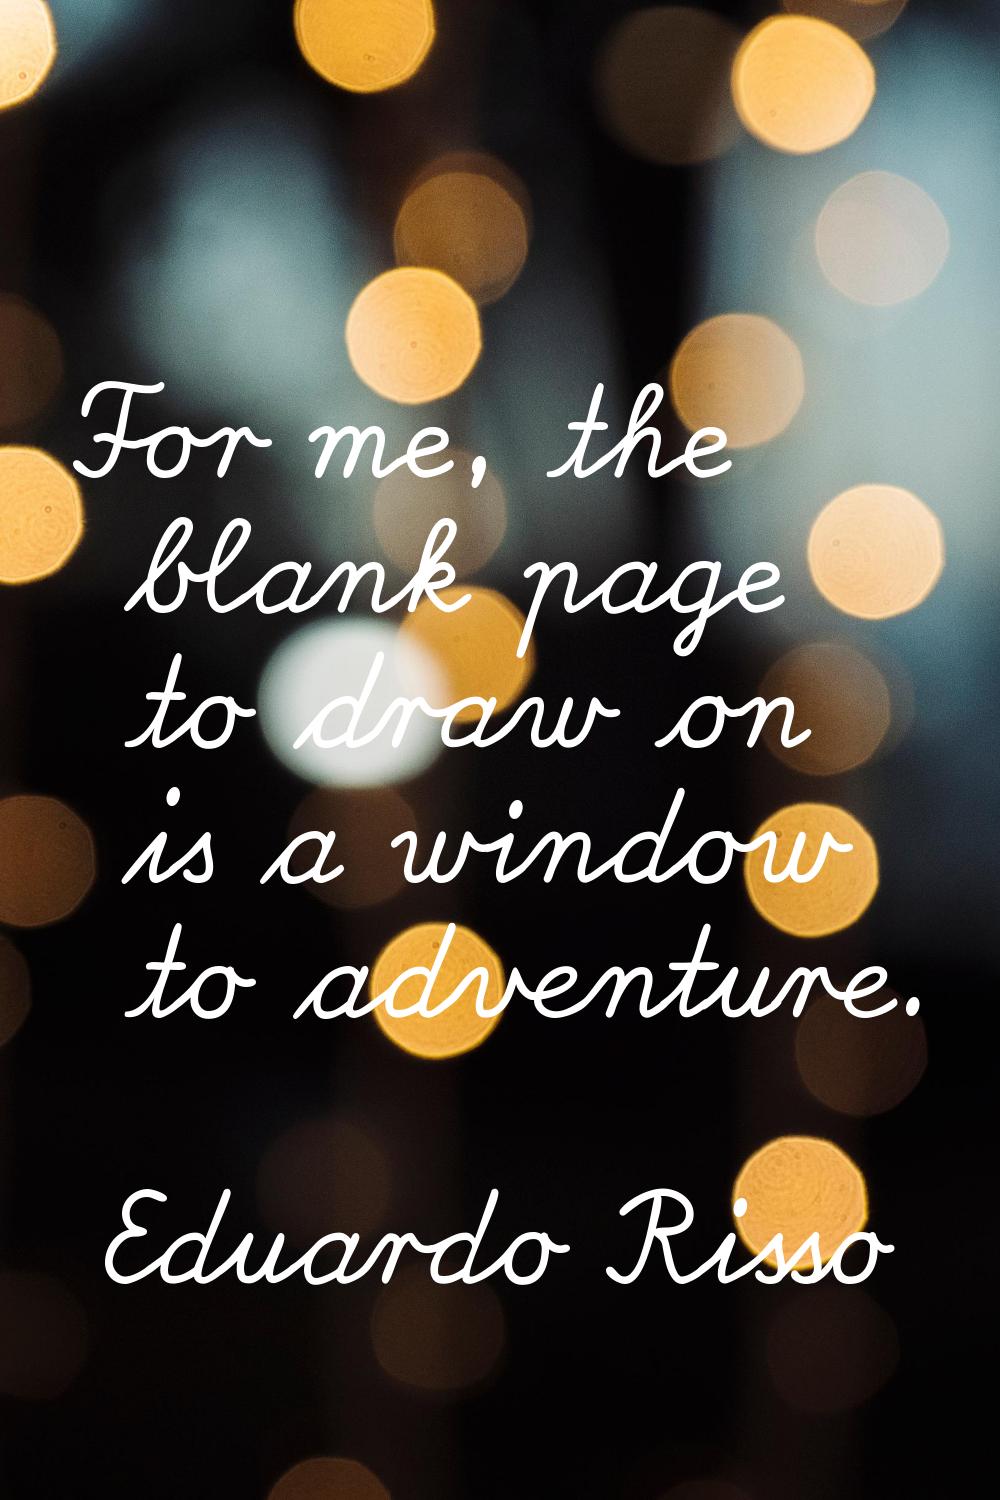 For me, the blank page to draw on is a window to adventure.